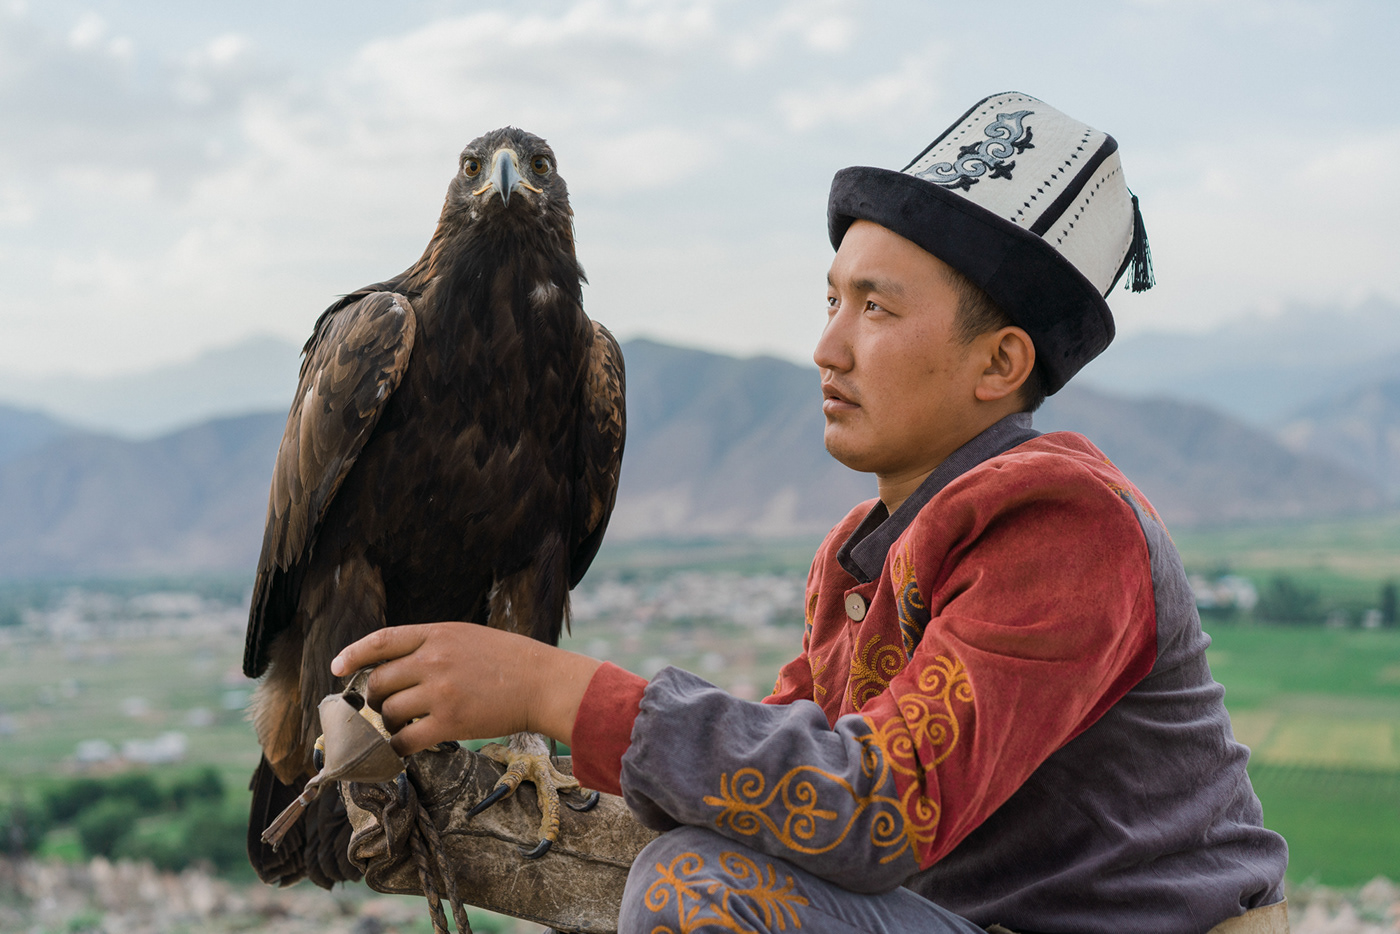 central asia culture eagle hunter Eagle Hunters film photography history kyrgyzstan people Travel travel photography